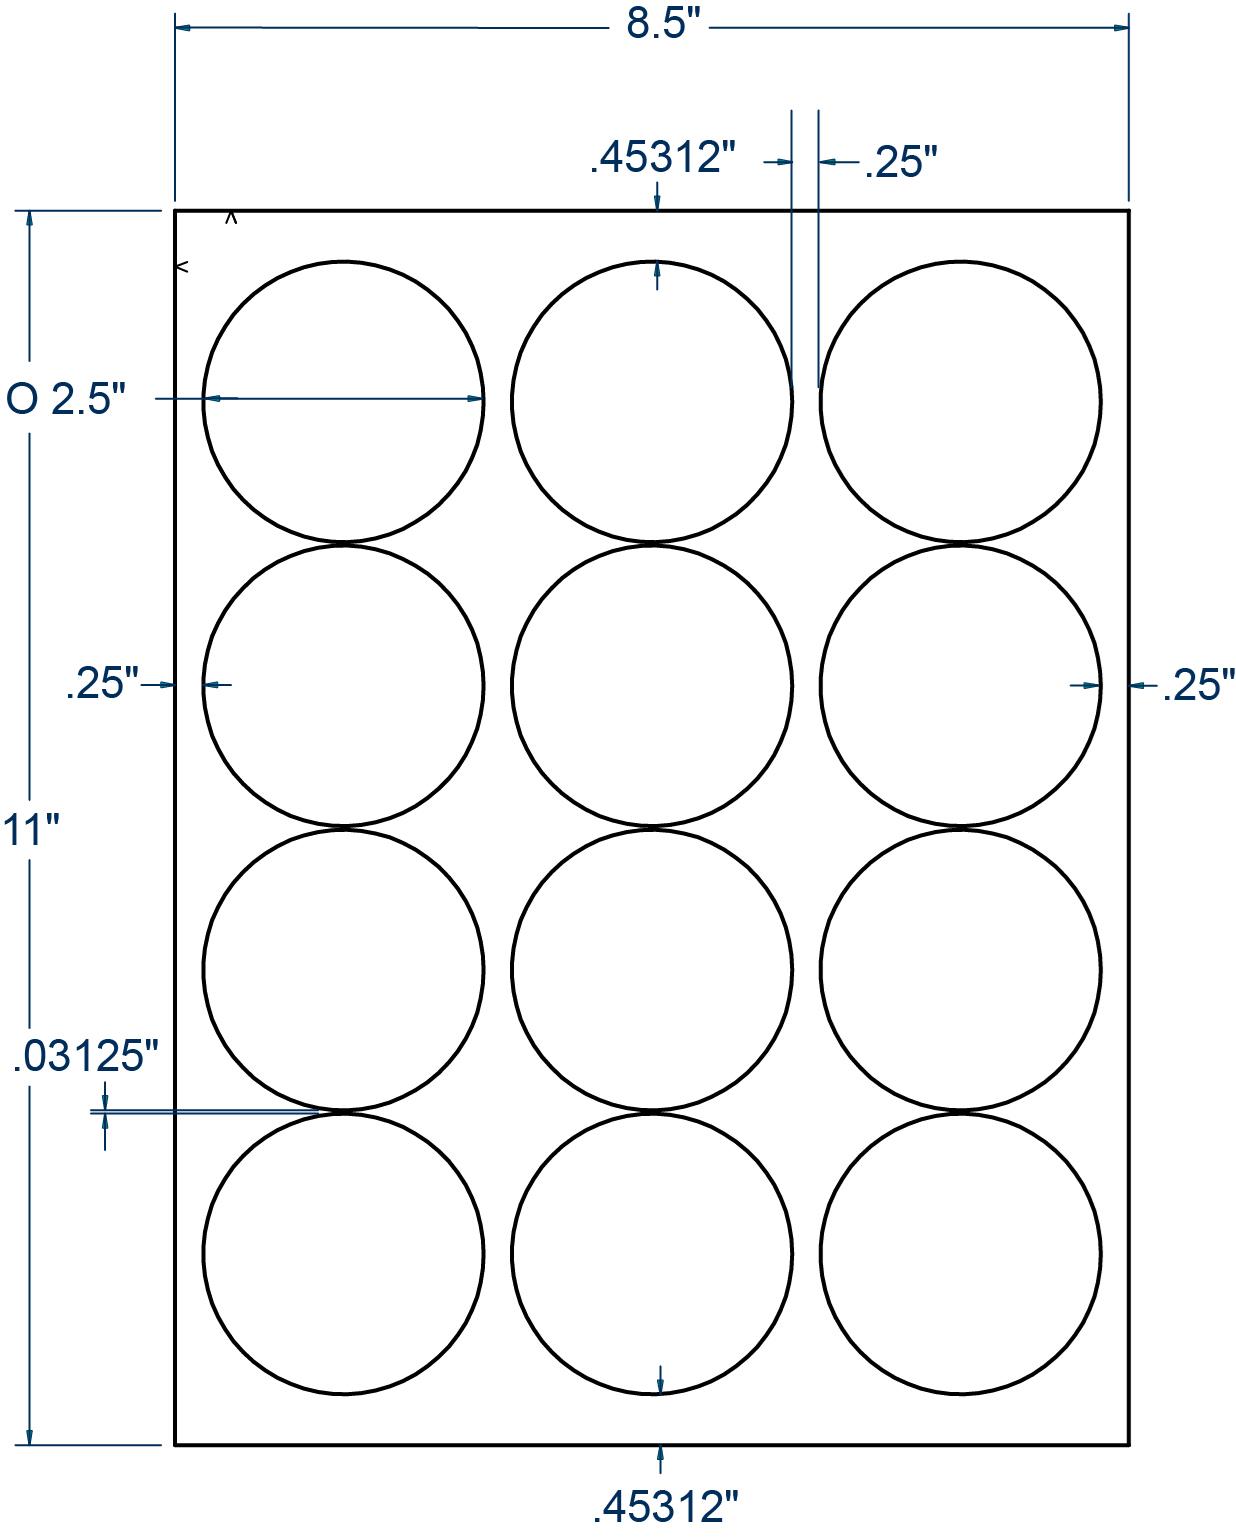 1 12 inch circle template